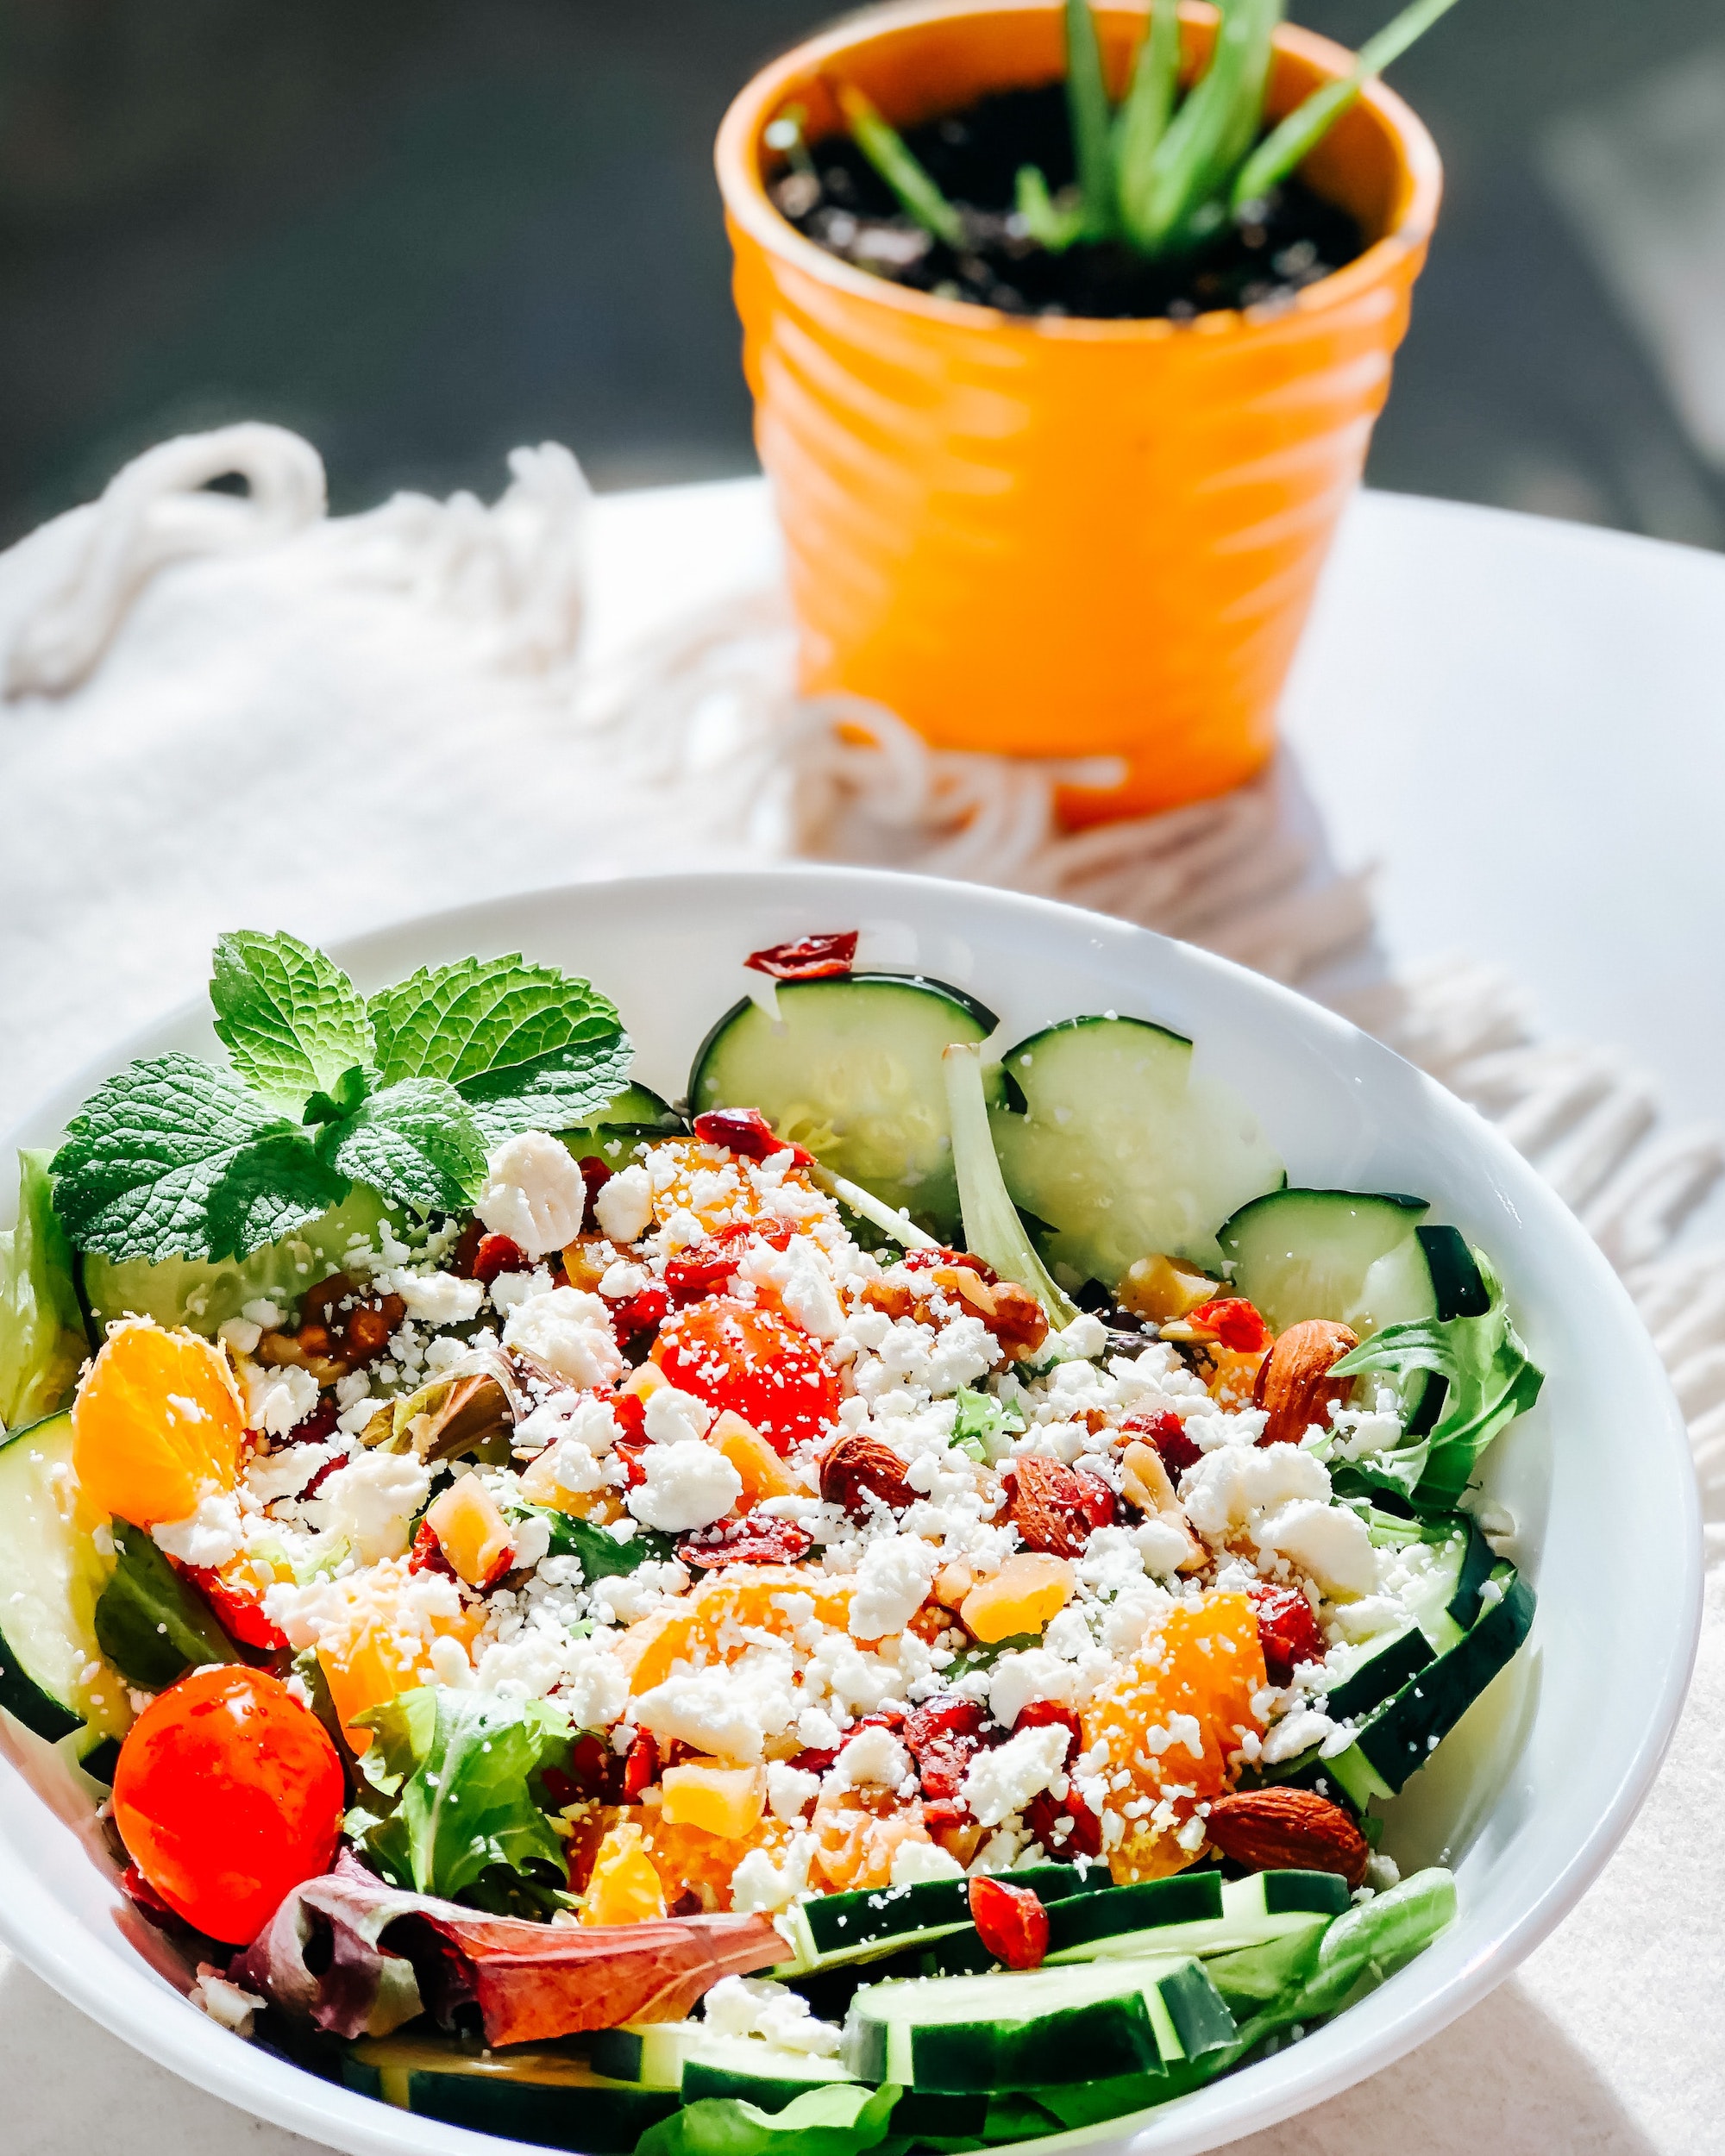 This classic Greek Summer Salad tops the list of kid friendly summer salads.